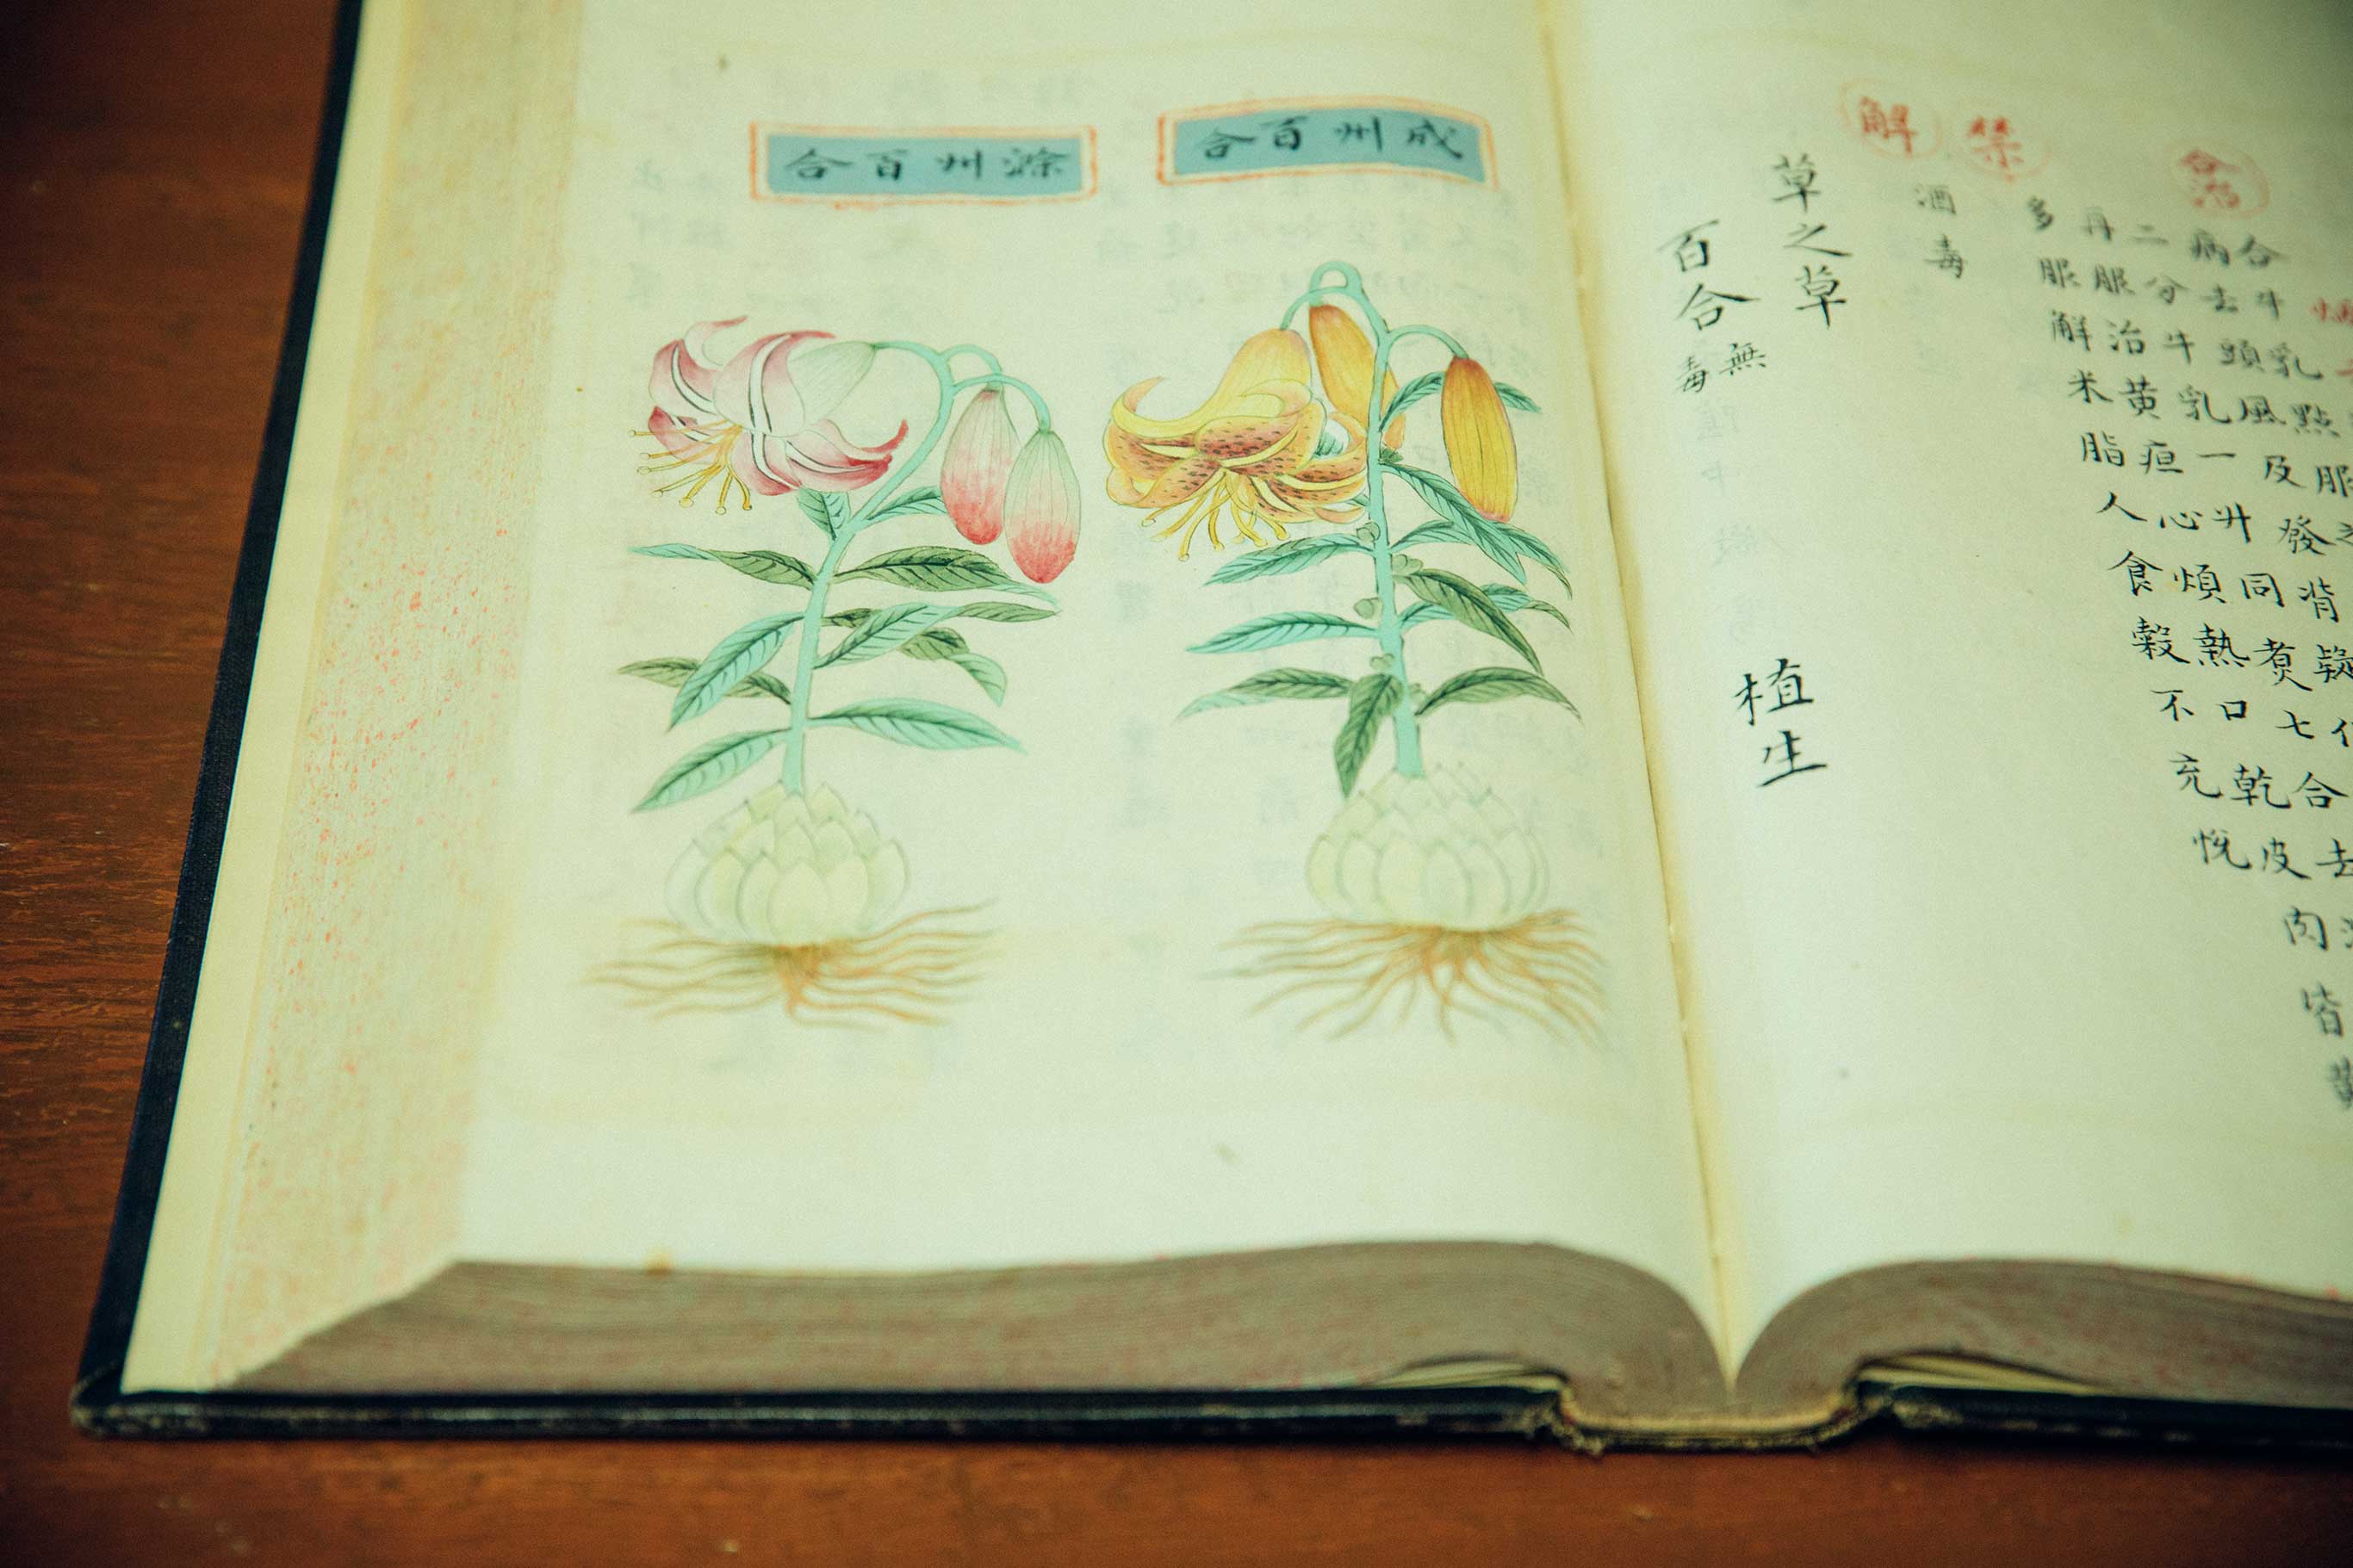 A herbal book that goes back to China’s Ming Dynasty, collected by 2nd generation doctor Yasuo Otsuka